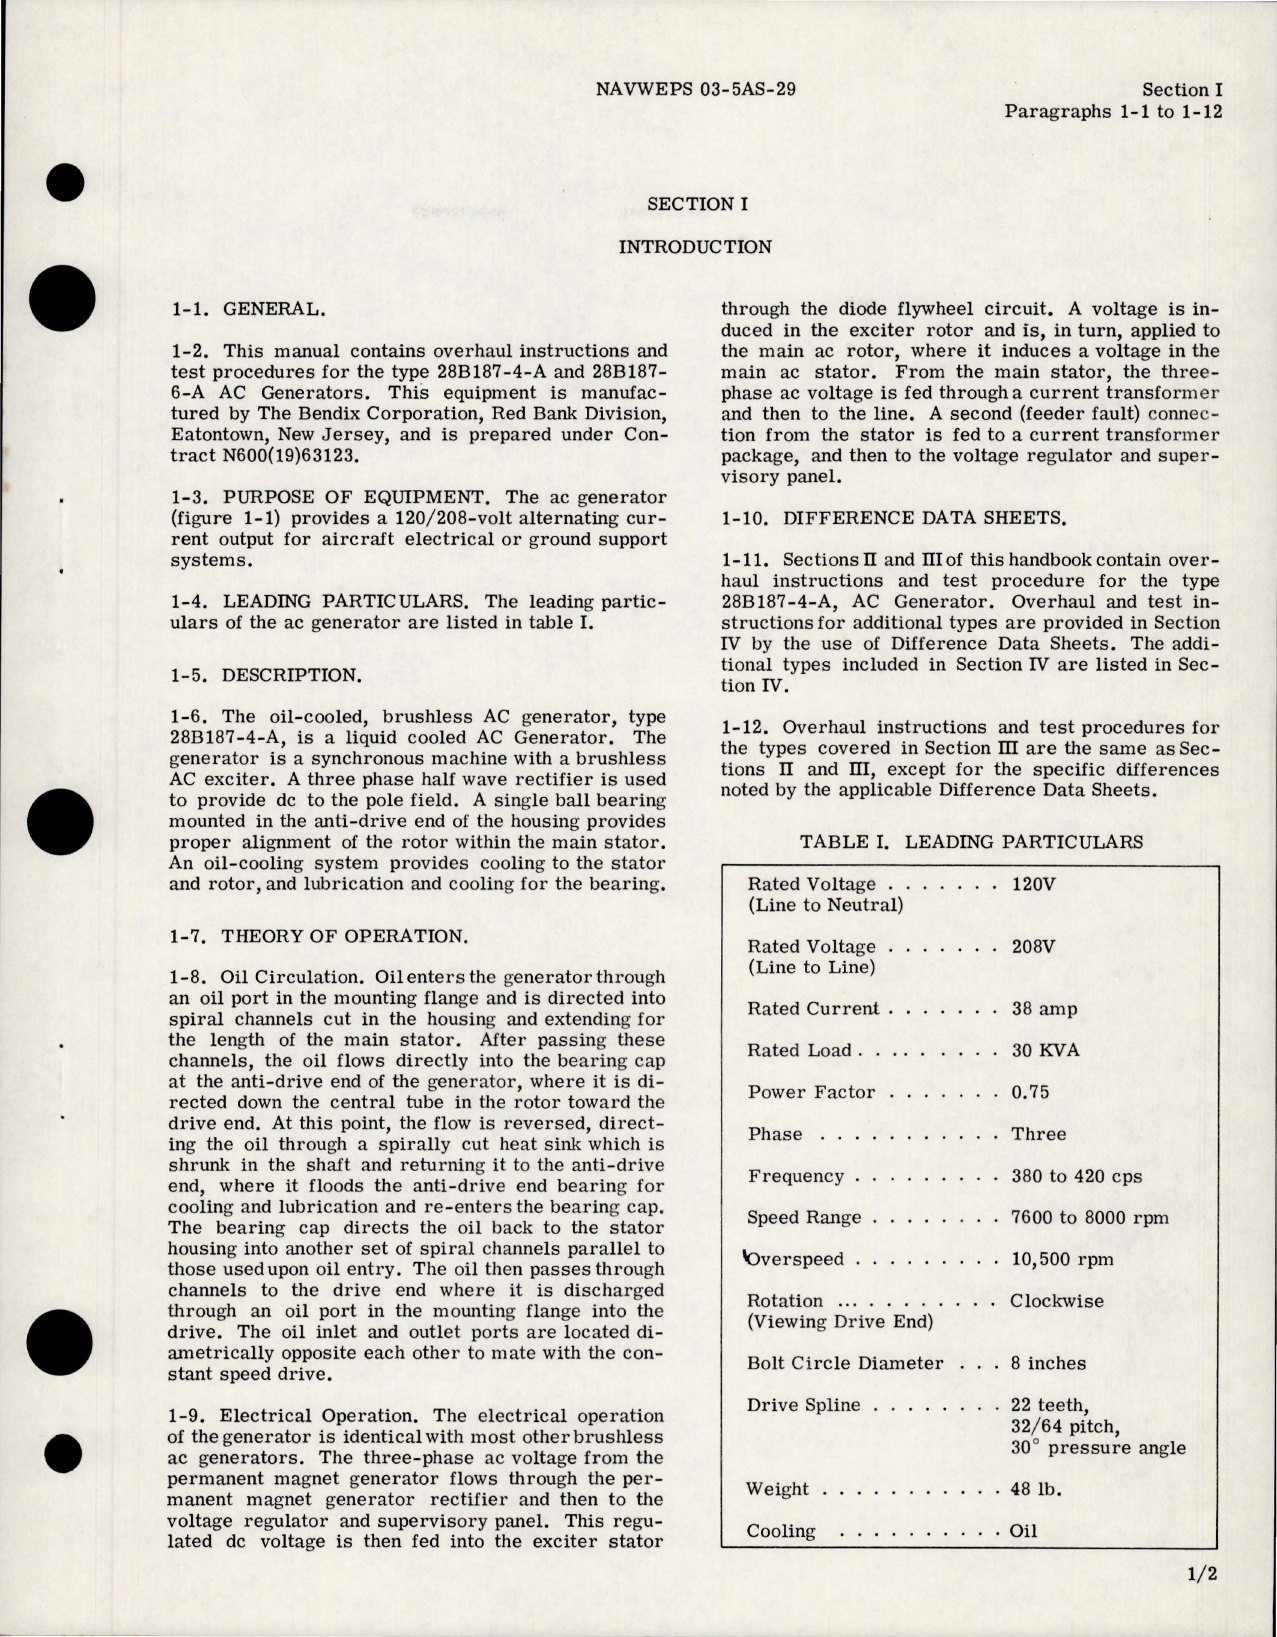 Sample page 5 from AirCorps Library document: Overhaul Instructions for AC Generator - Type 28B187-4-A, 28B187-6-A 